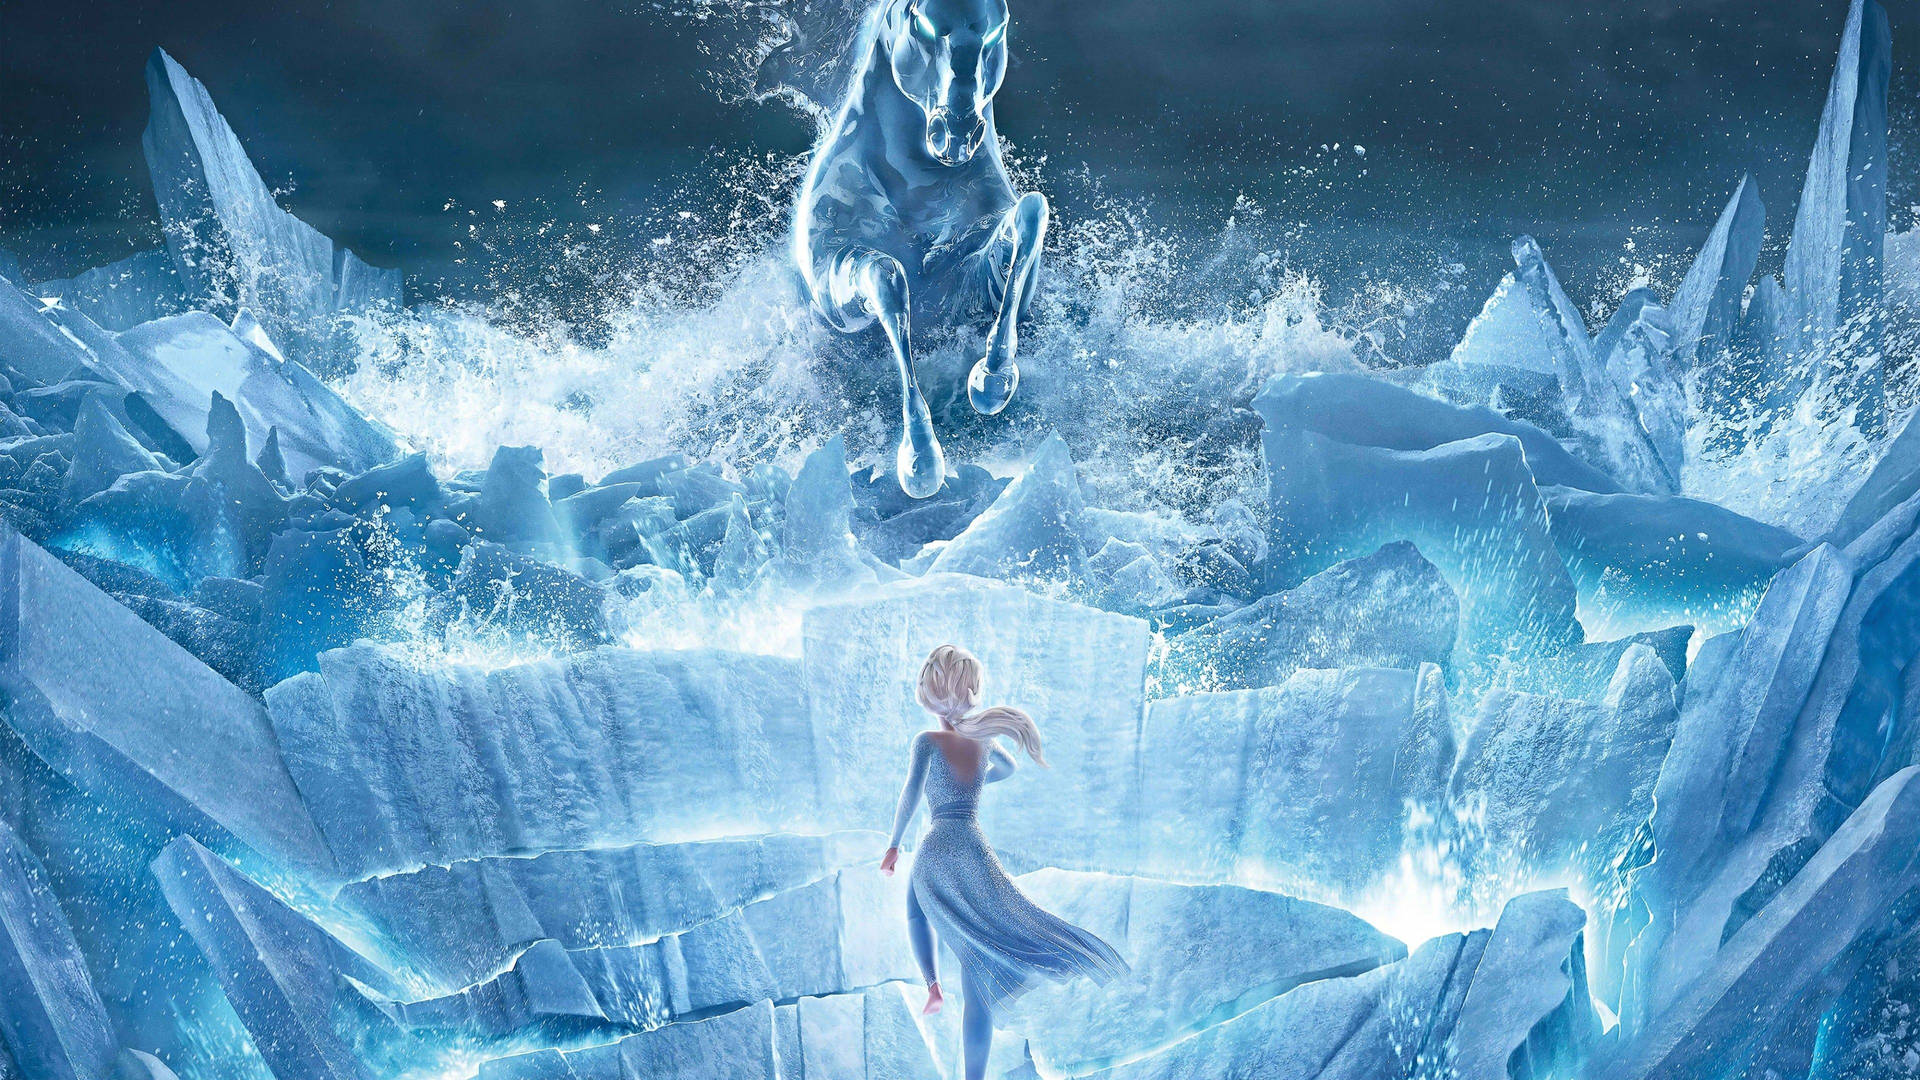 Creating a picture of Elsa 